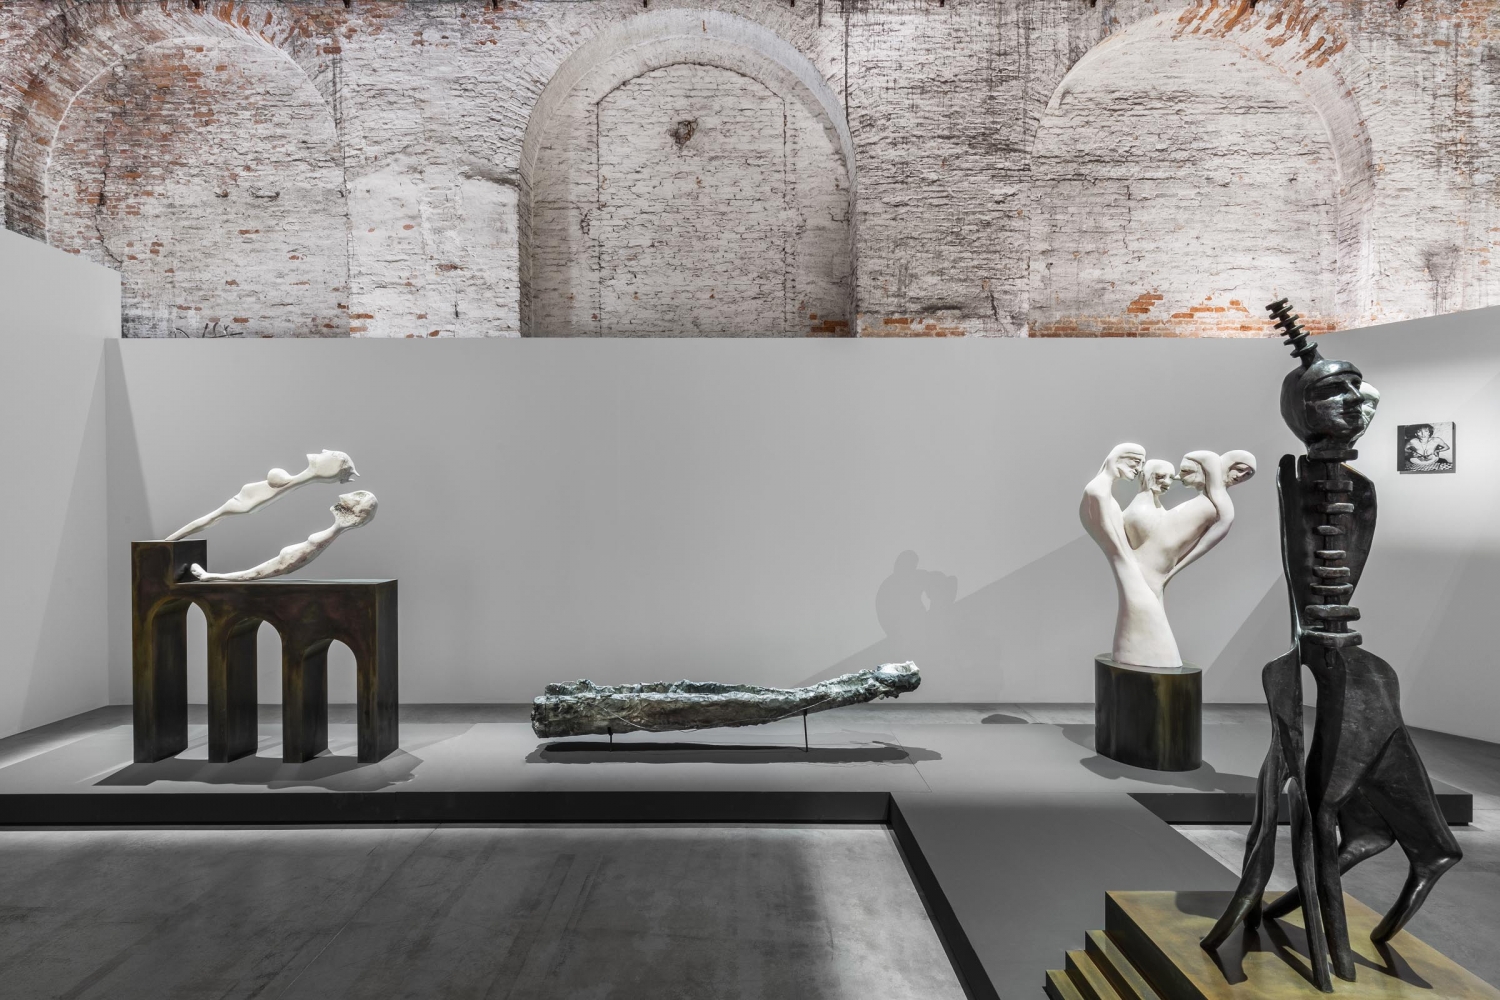 Installation view: Italian Pavilion at the 57th edition of the Venice Biennale, 2019